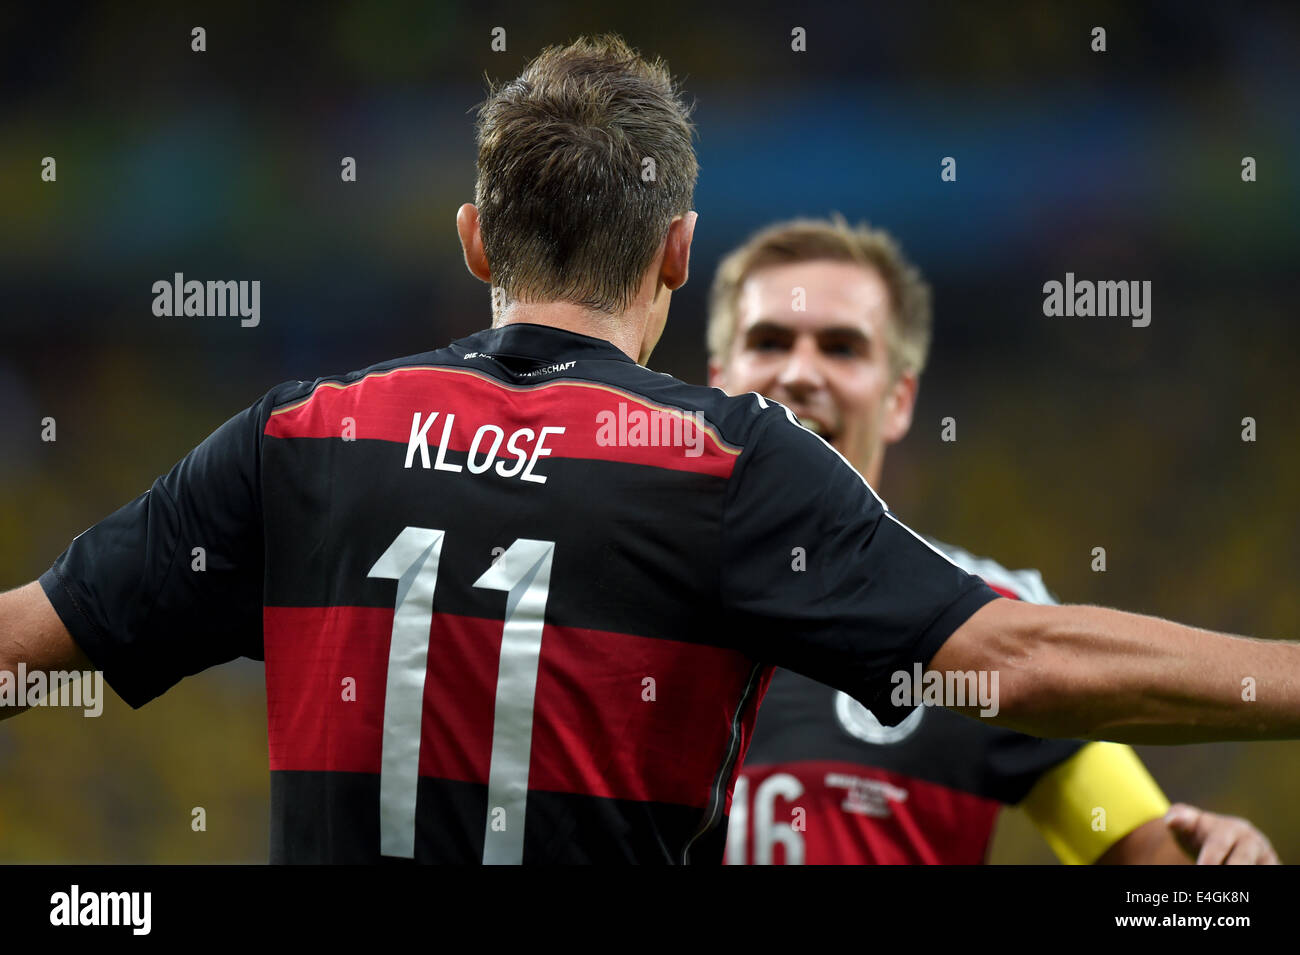 Belo Horizonte, Brazil. 8th July, 2014. Miroslav Klose (GER) Football/Soccer : Miroslav Klose of Germany celebrates with his teammate Philipp Lahm after scoring their second goal during the FIFA World Cup Brazil 2014 Semi-finals match between Brazil 1-7 Germany at Estadio Mineirao in Belo Horizonte, Brazil . © FAR EAST PRESS/AFLO/Alamy Live News Stock Photo